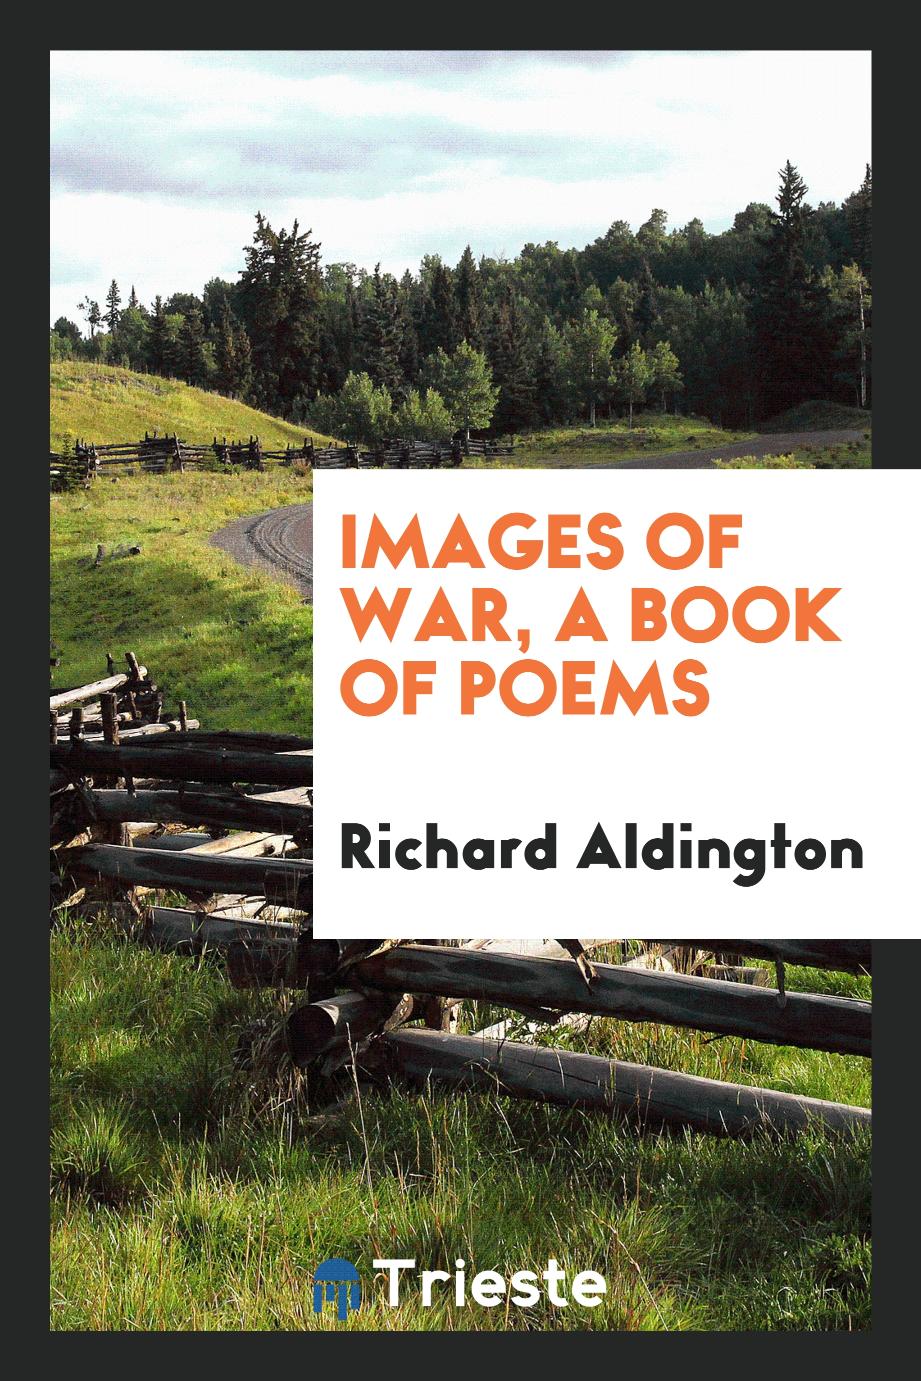 Images of war, a book of poems